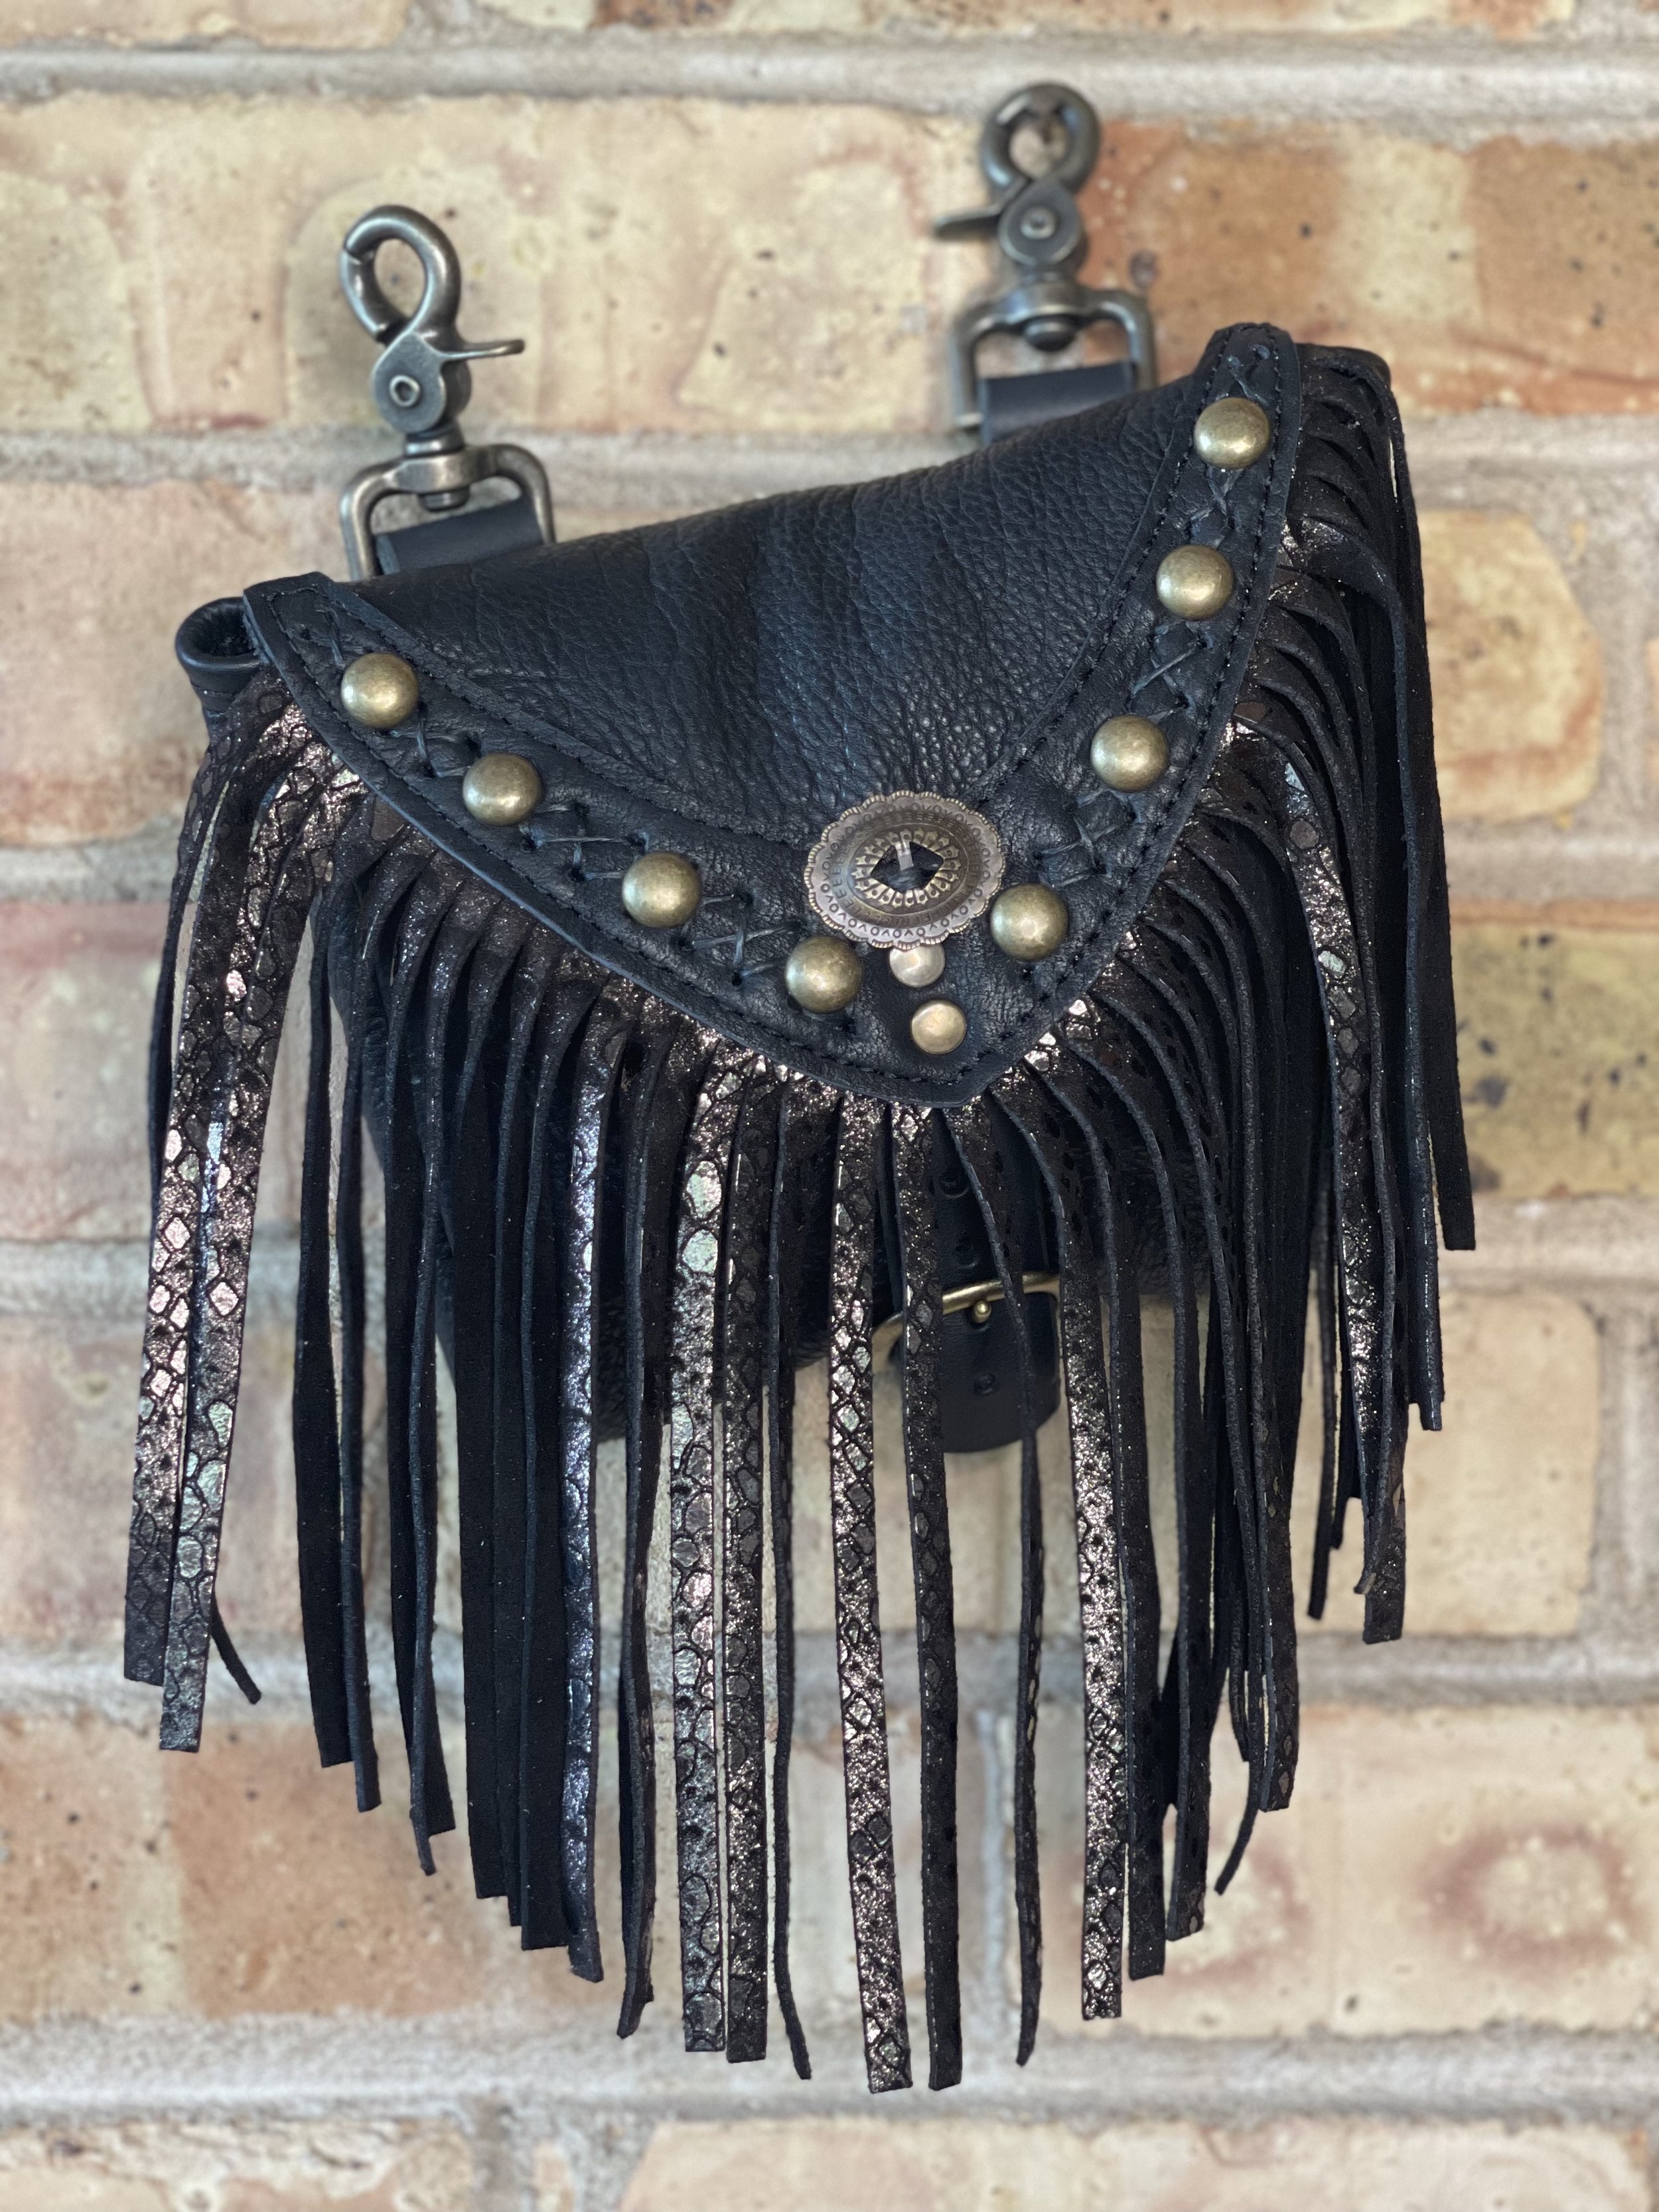 On The Road Hip Bag in Black Bison, Black + Silver Python Fringe, Black Criss Cross Handstitching, Studs, and a Concho